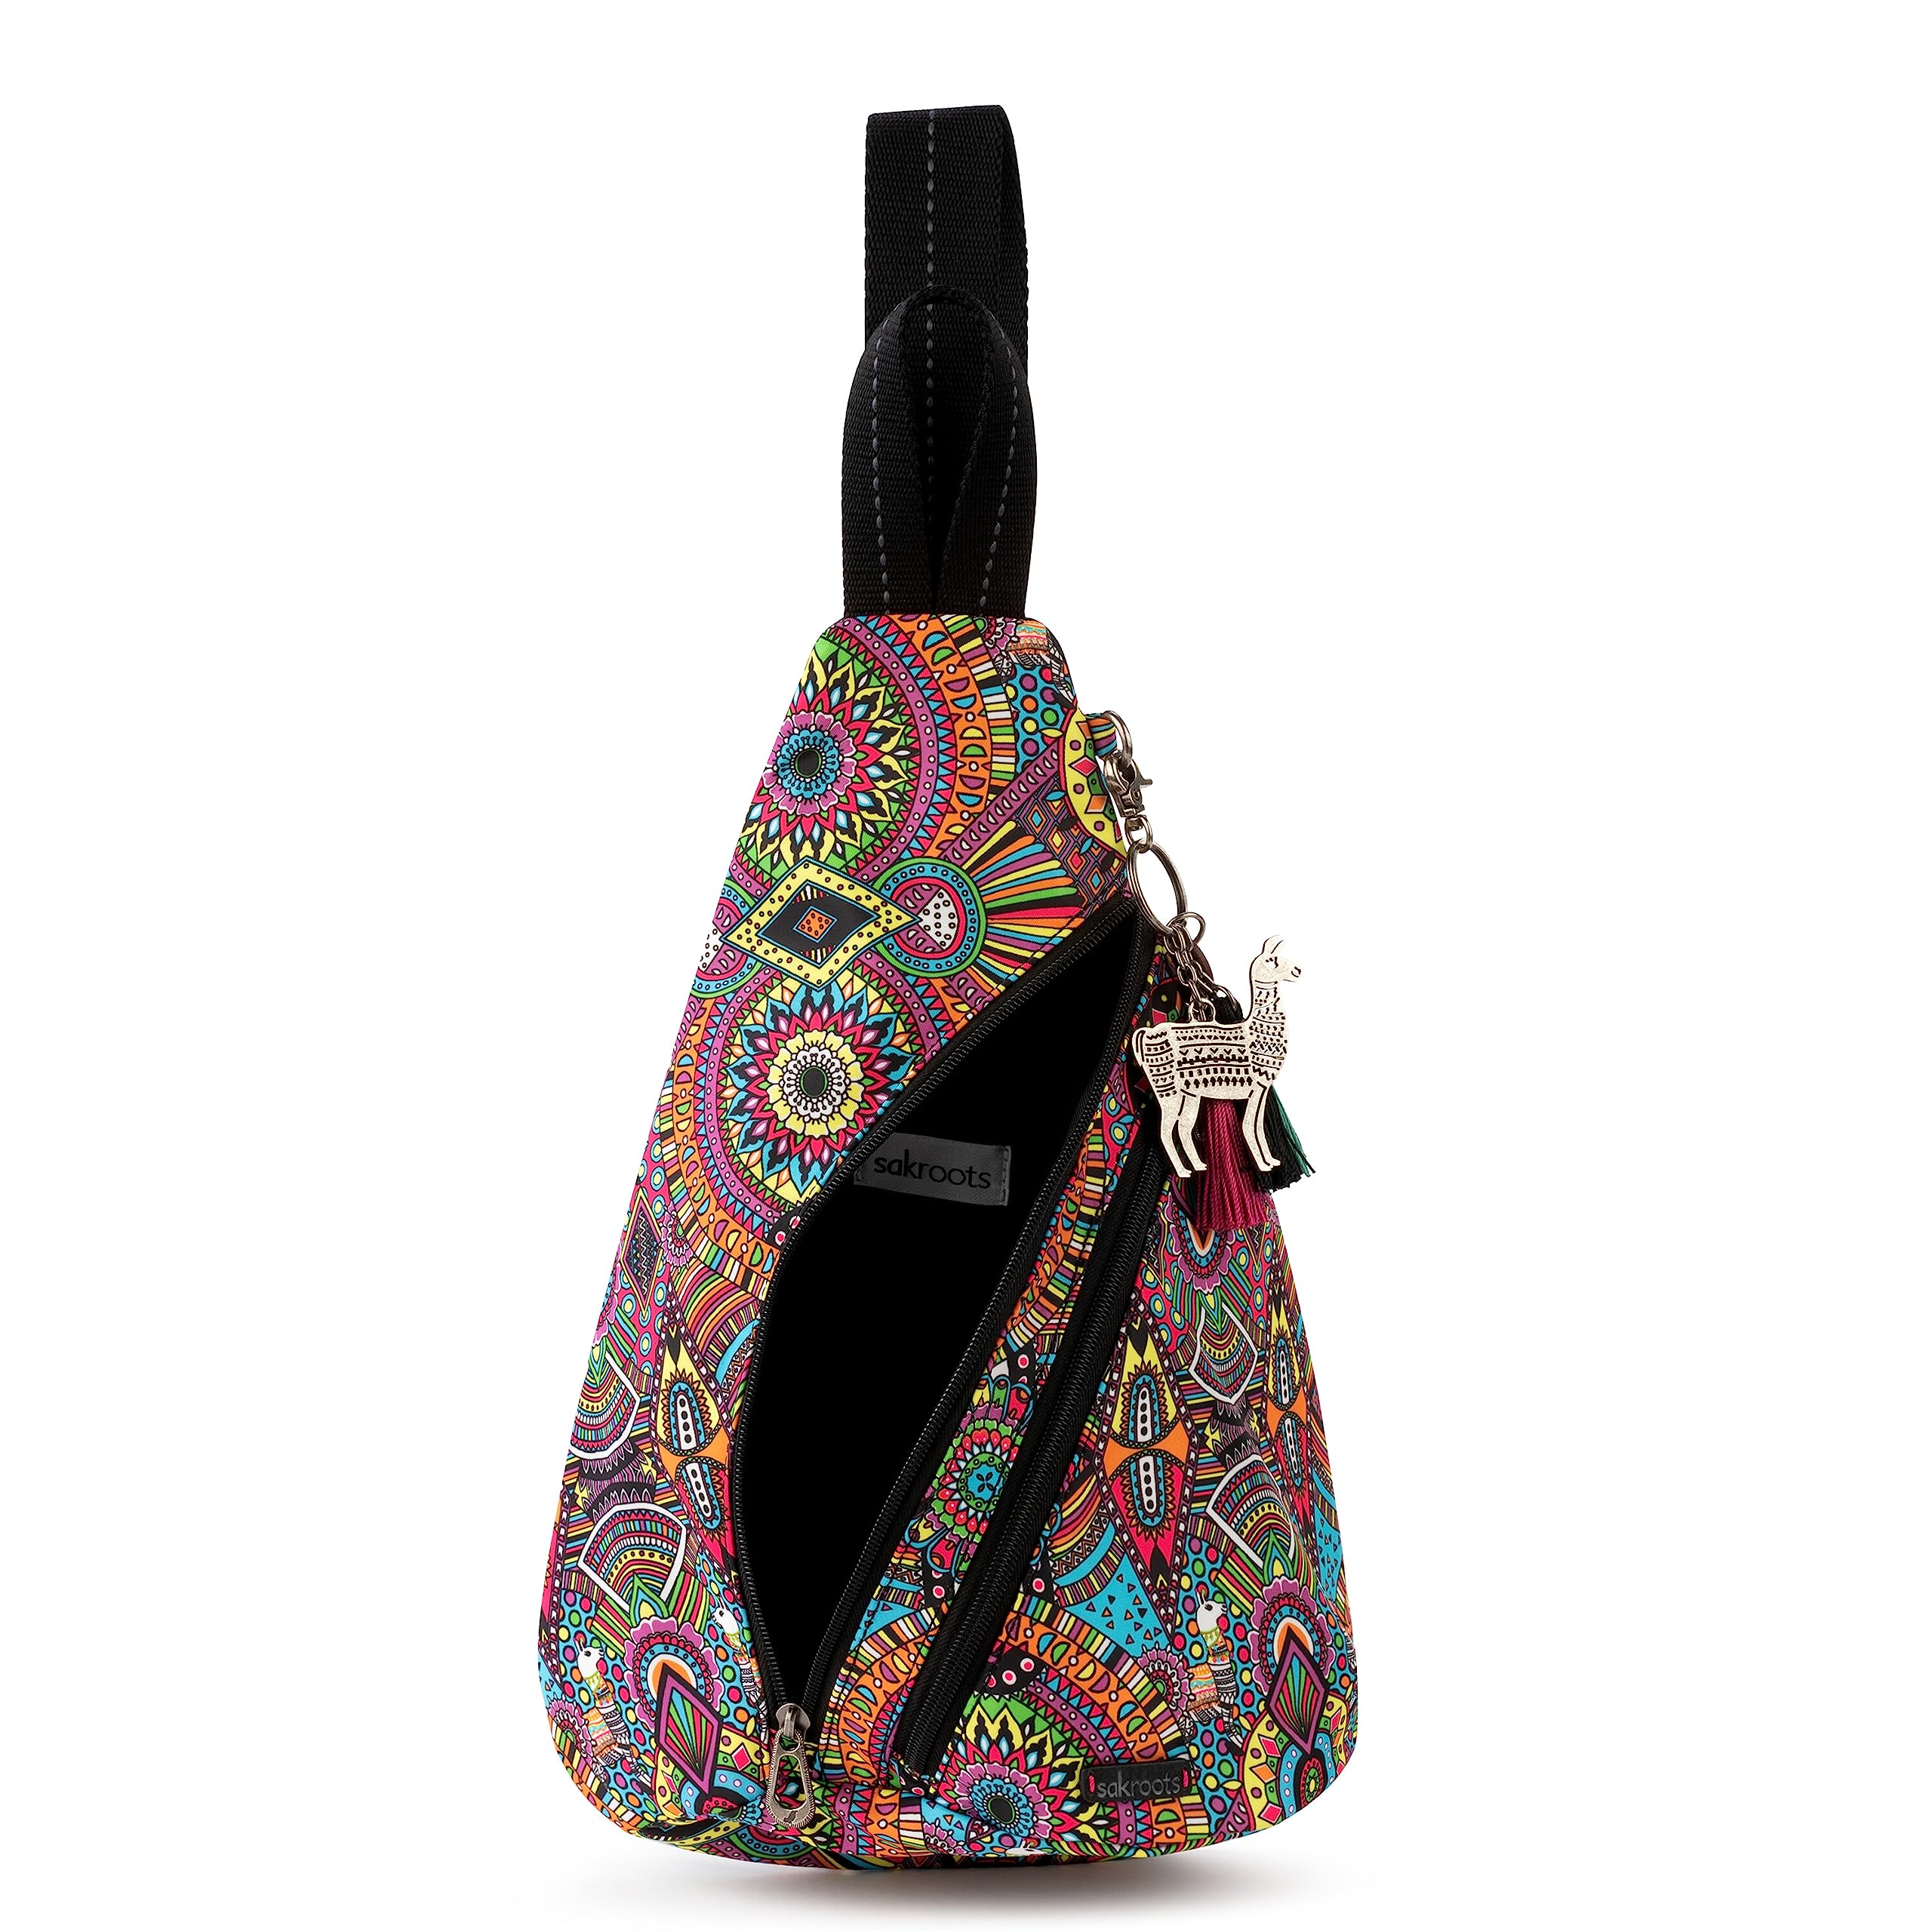 Sakroots Women's Go Sling Backpack in Nylon Eco Twill, Rainbow Wanderlust, One Size